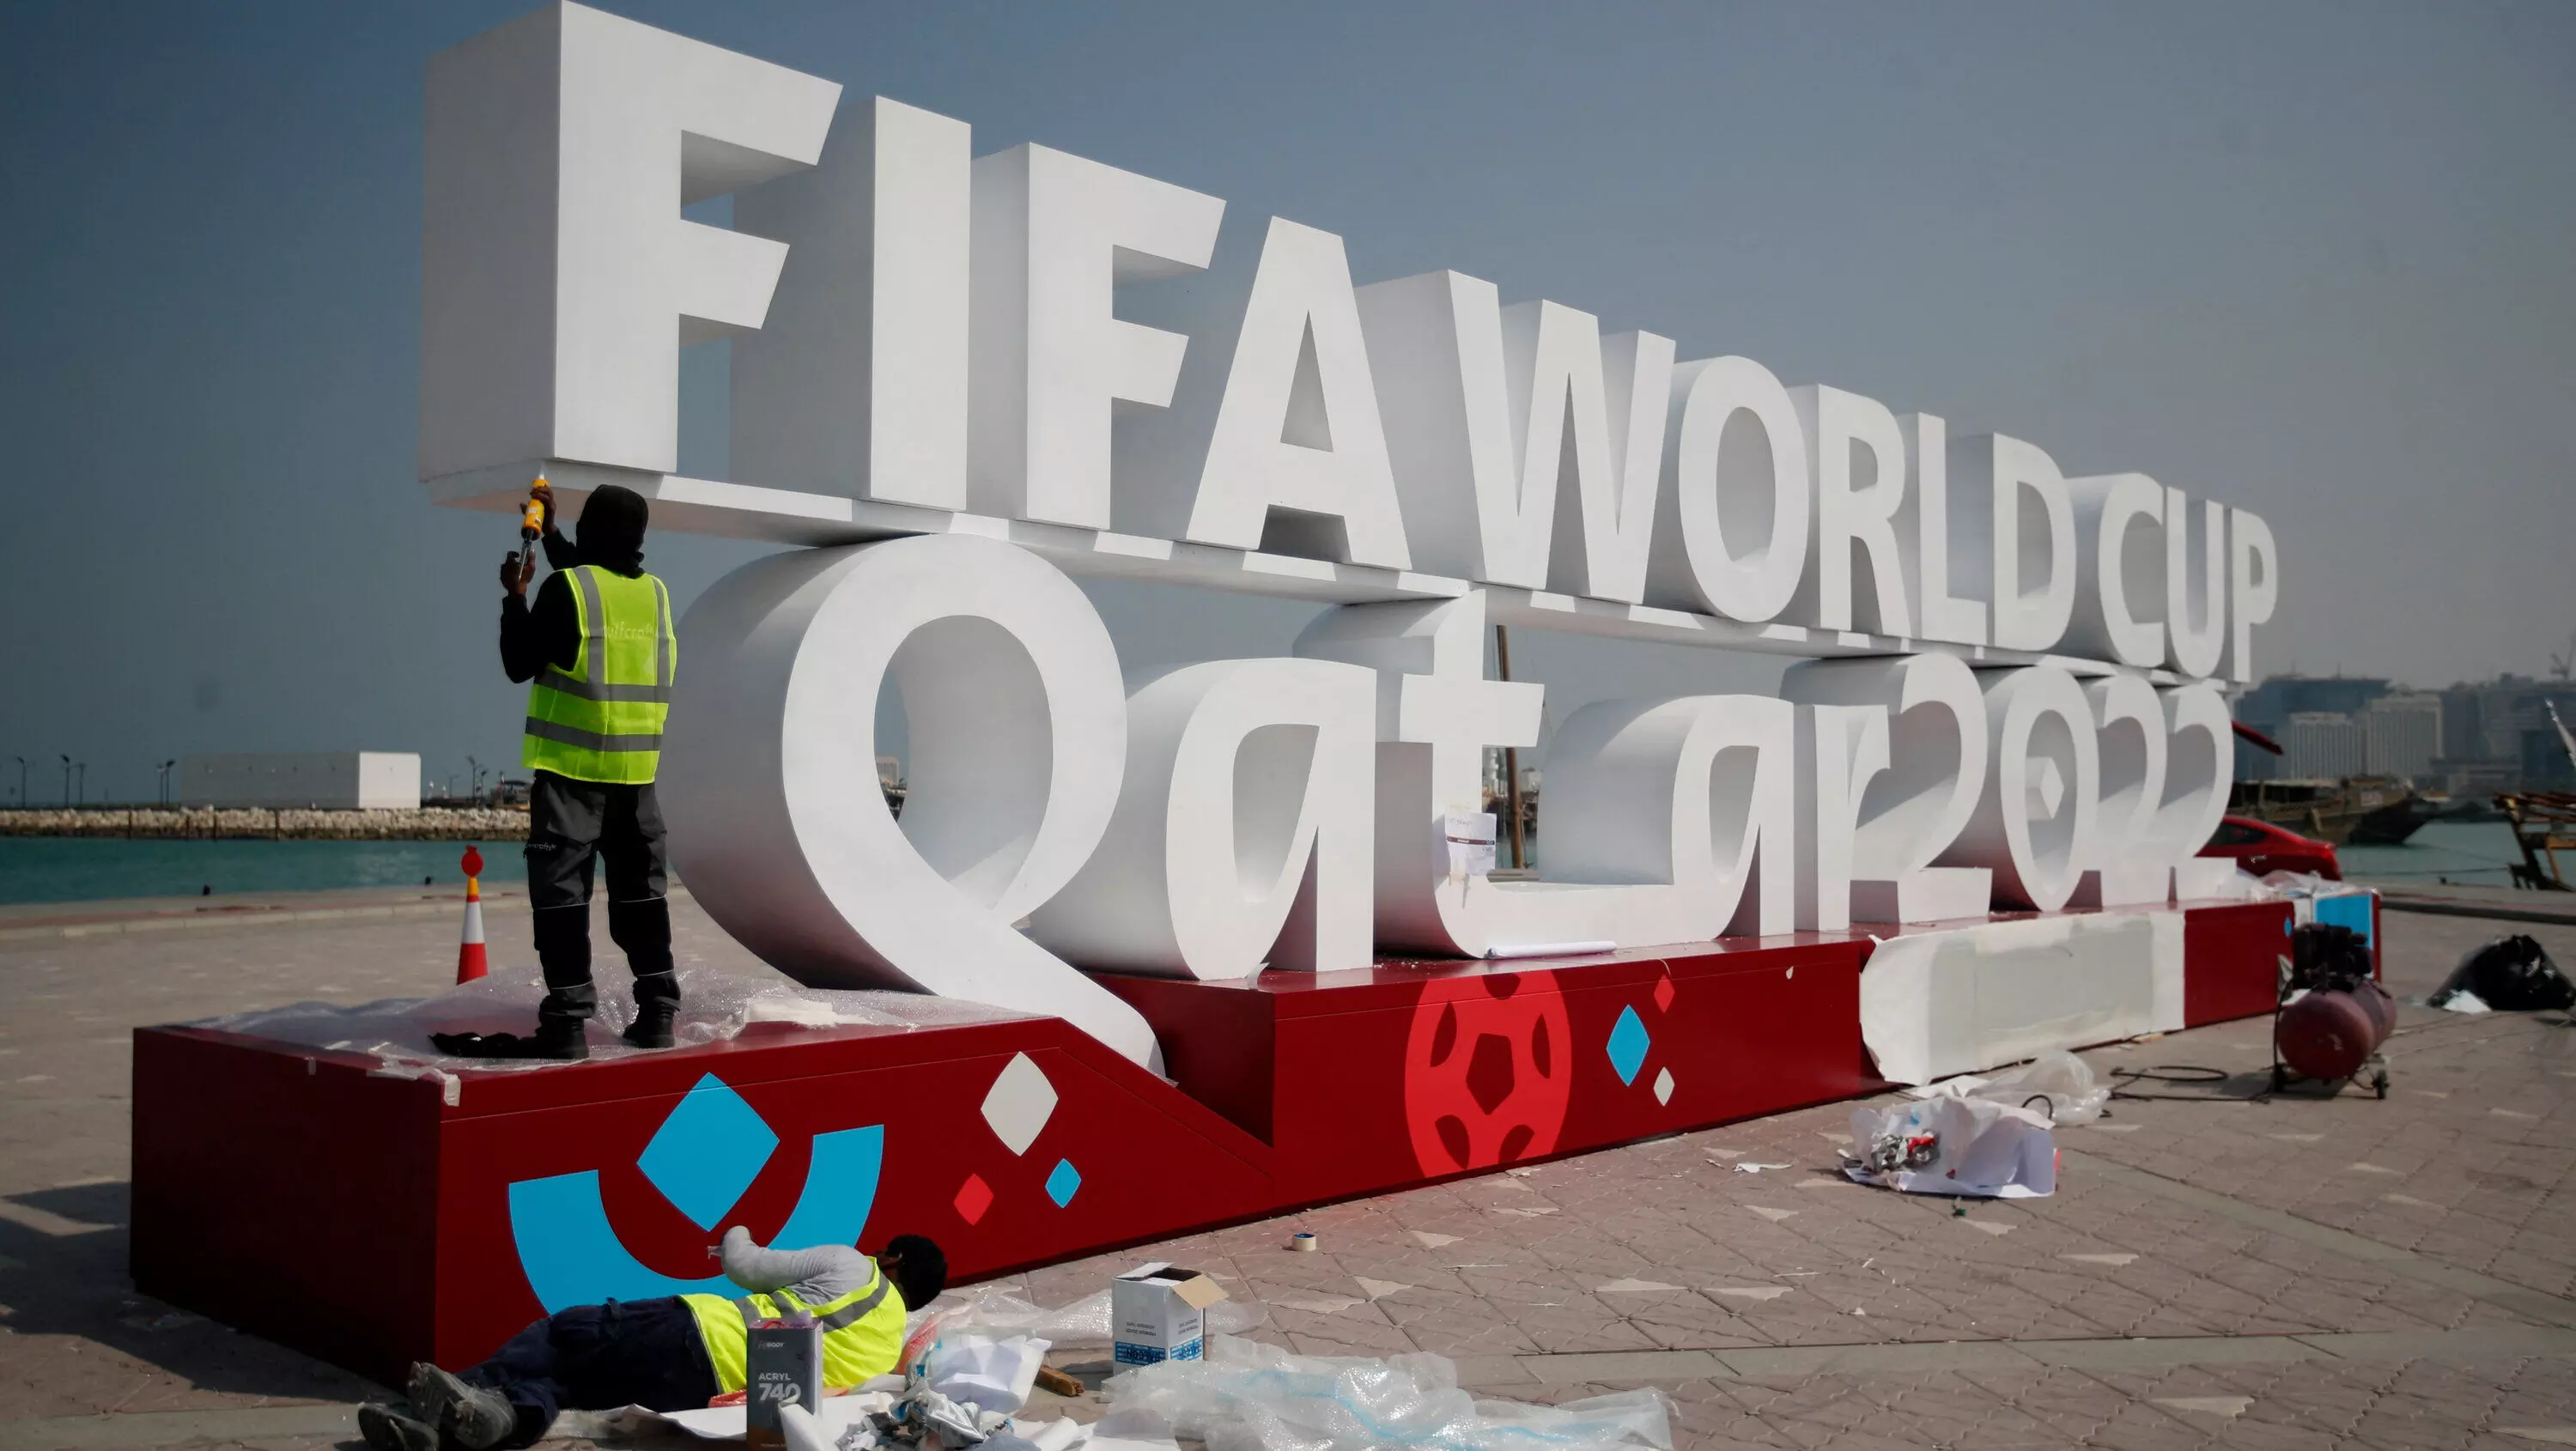 India-based hacking group allegedly targets Qatar world cup critics